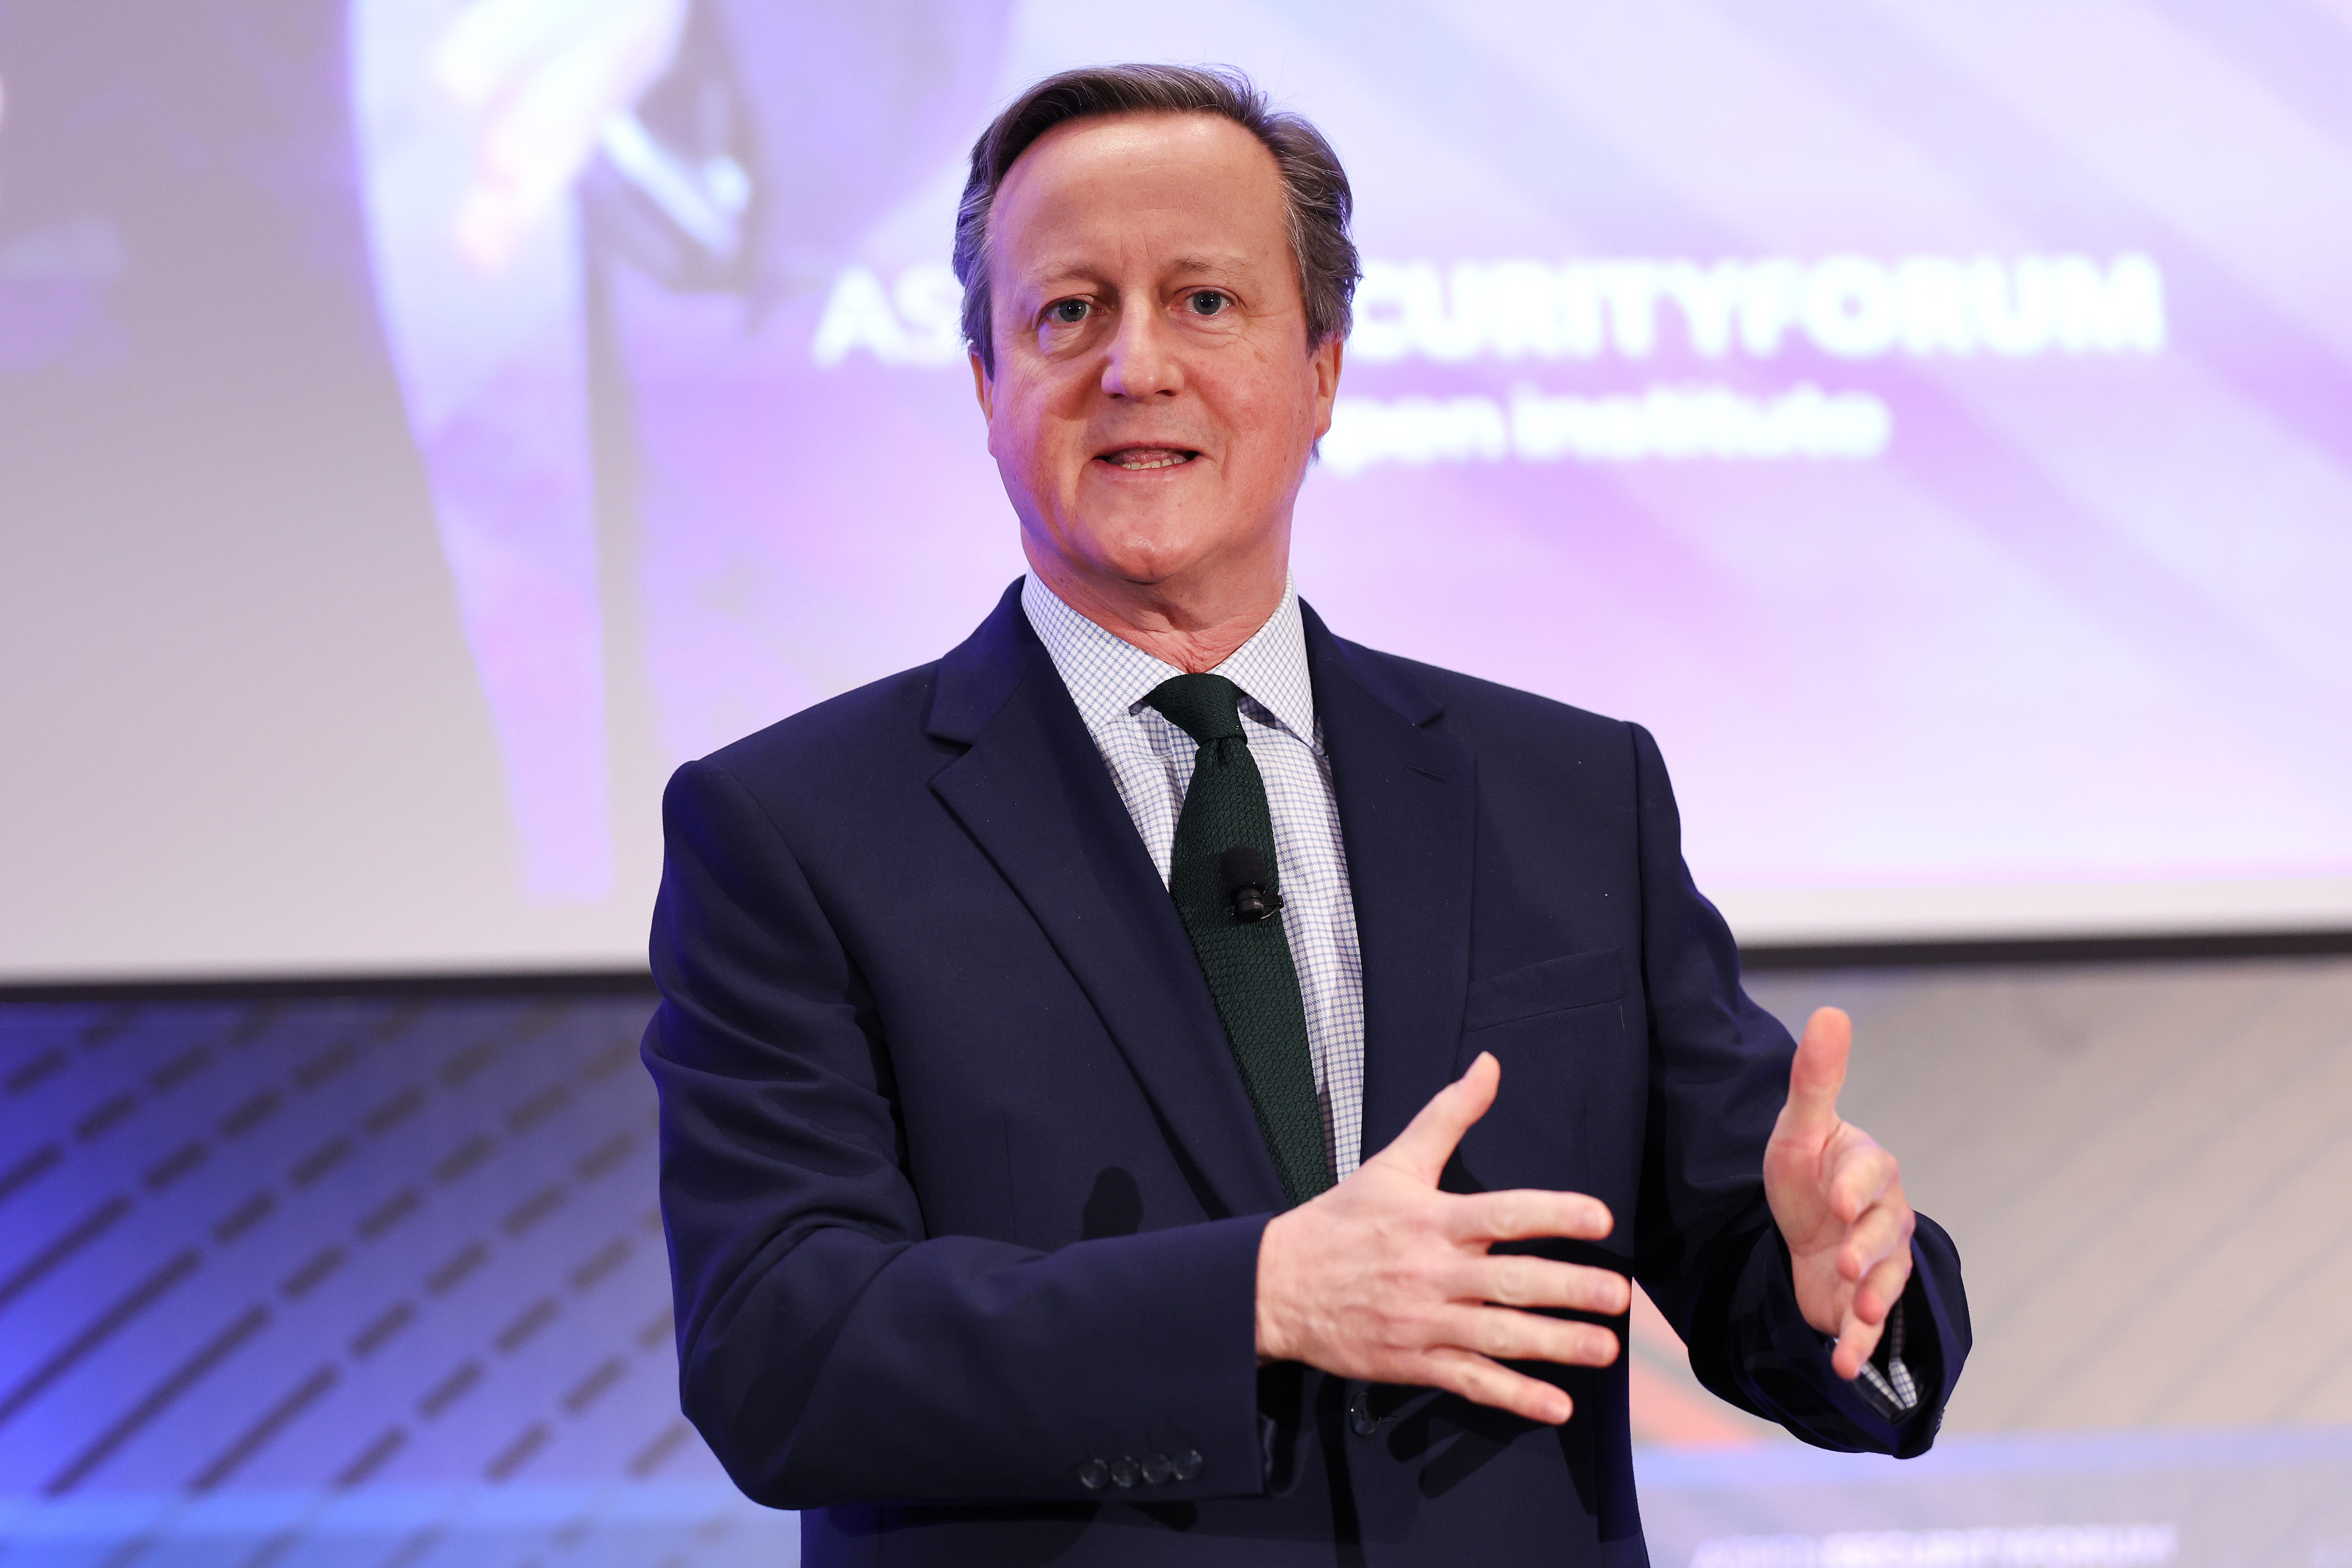 The message delivered by David Cameron in Washington was very much needed